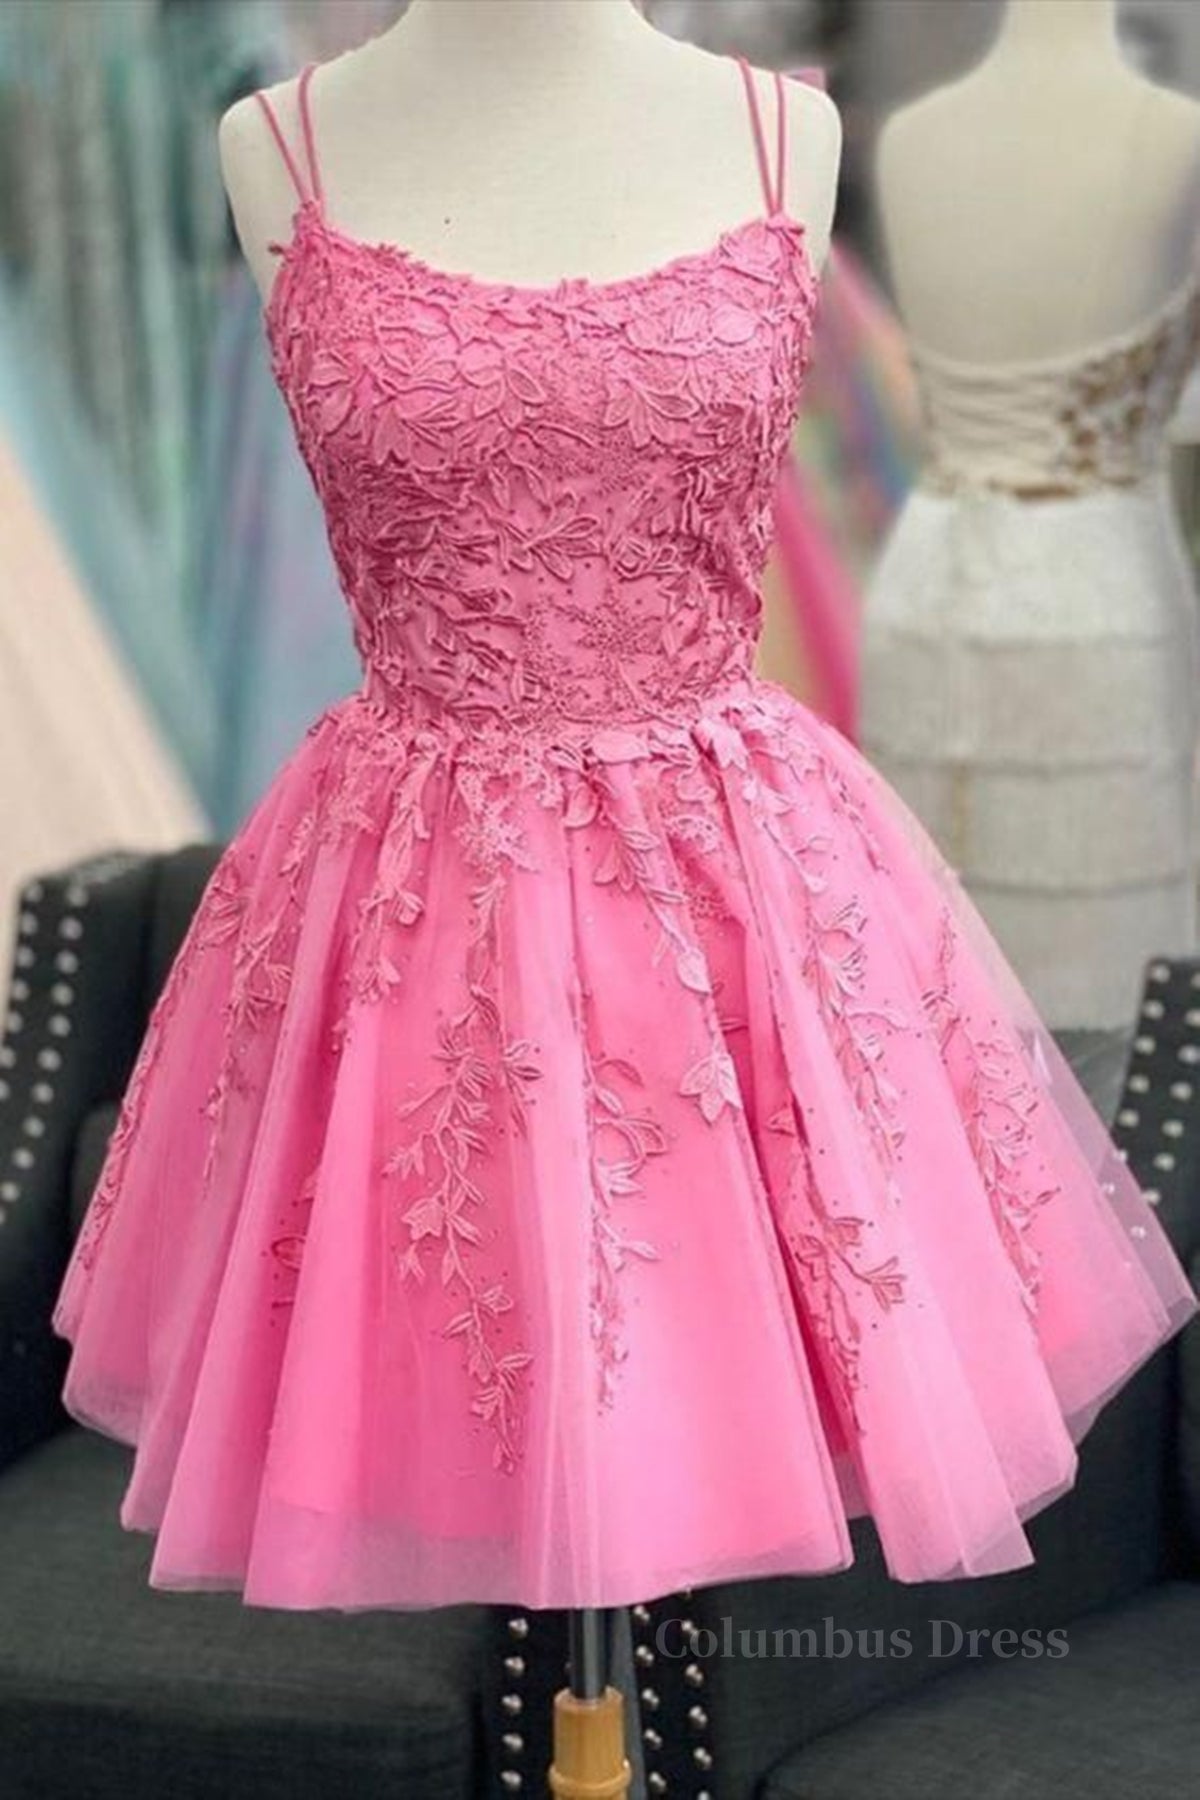 Short Pink Backless Lace Corset Prom Dresses, Short Pink Open Back Corset Formal Corset Homecoming Dresses outfit, Evening Dress Long